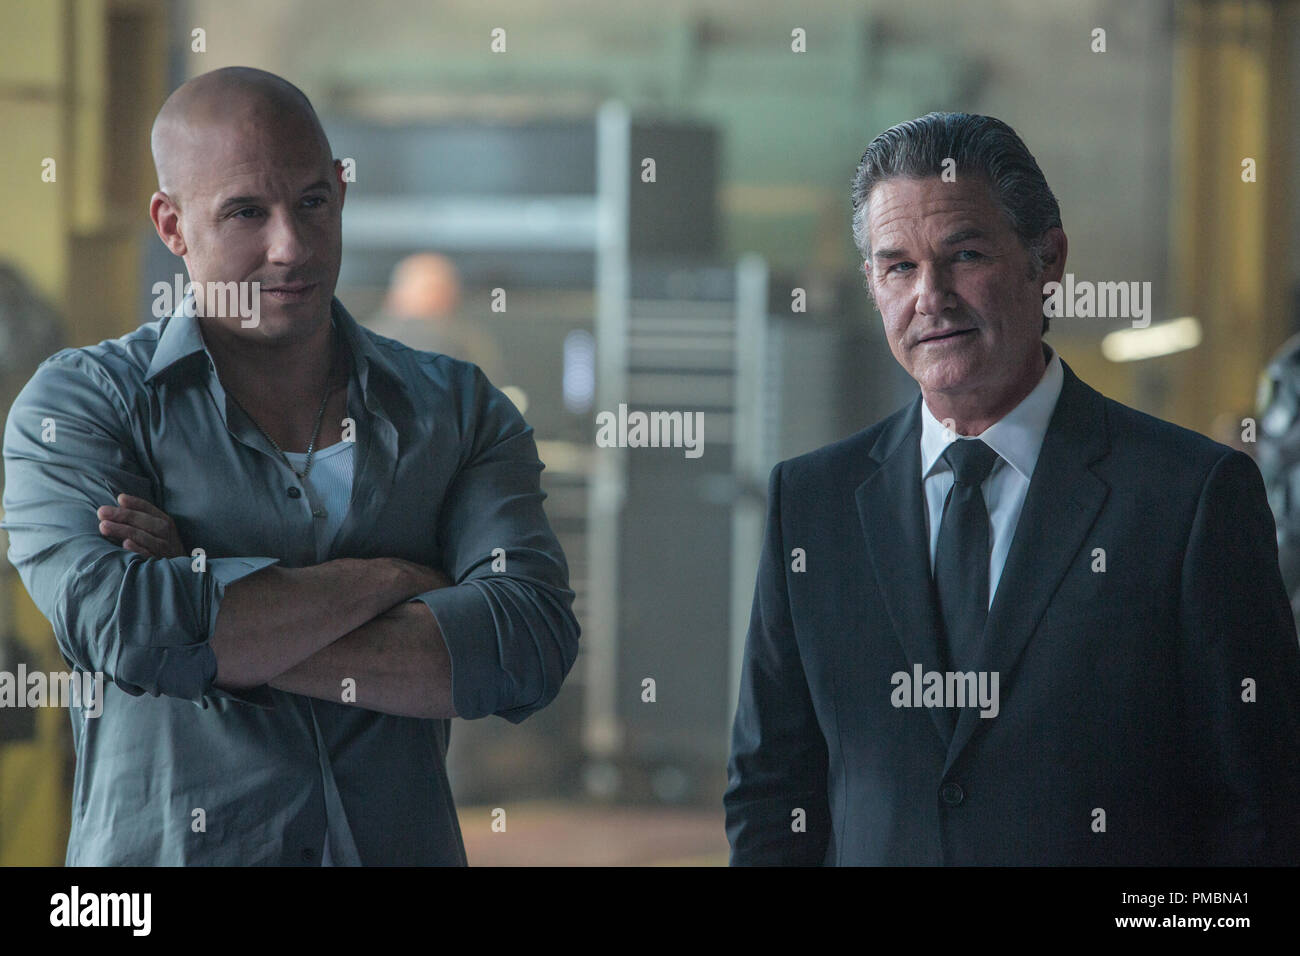 (L to R) Dom (VIN DIESEL) discusses the mission with a high-level government operative (KURT RUSSELL) in 'Furious 7'. Continuing the global exploits in the unstoppable franchise built on speed, James Wan directs this chapter of the hugely successful series. Stock Photo